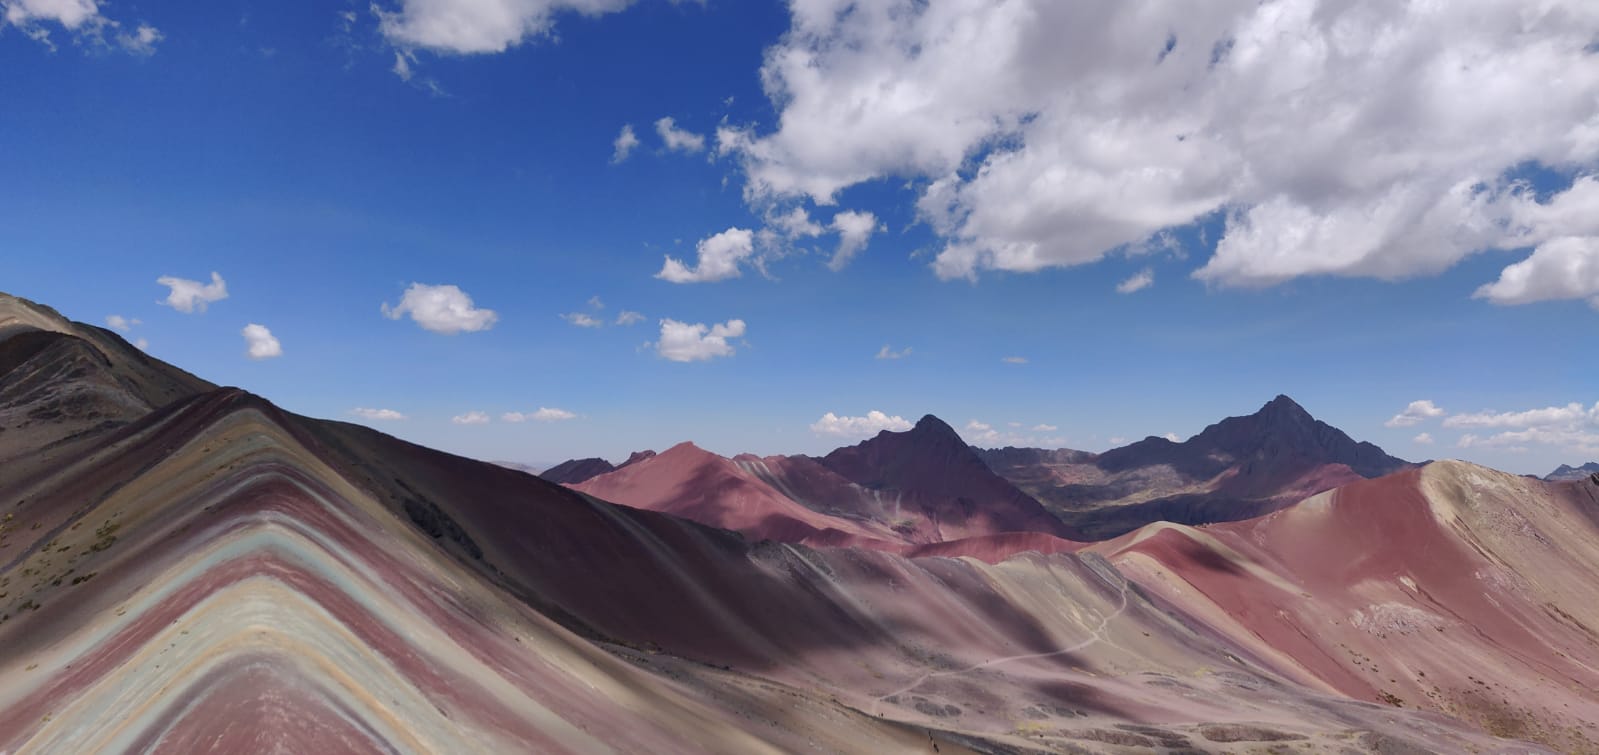 The Rainbow mountain or Vinicunca, the prettiest face on this arduous trail